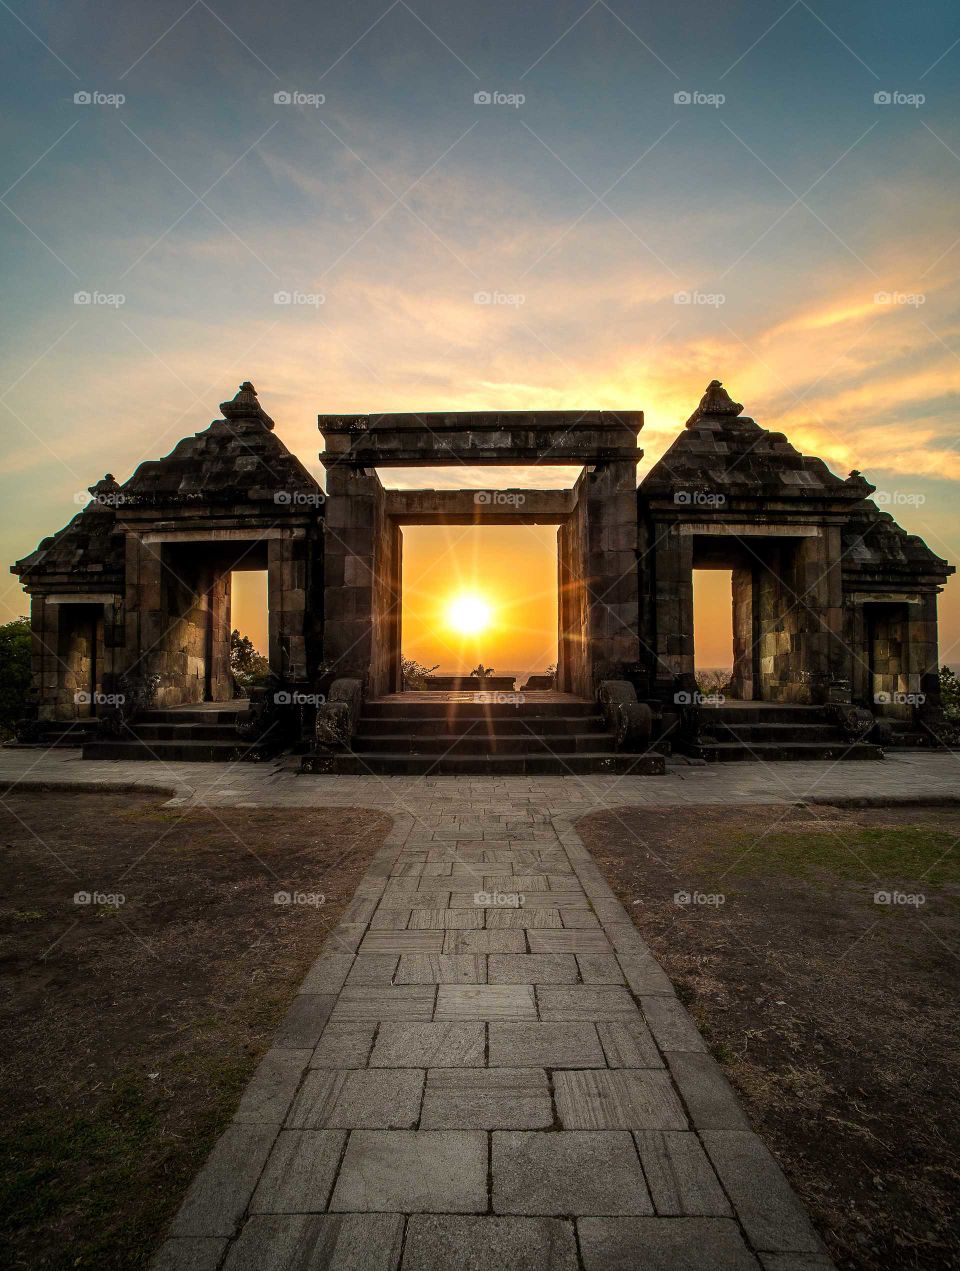 The Surya Gate at Boko Temple